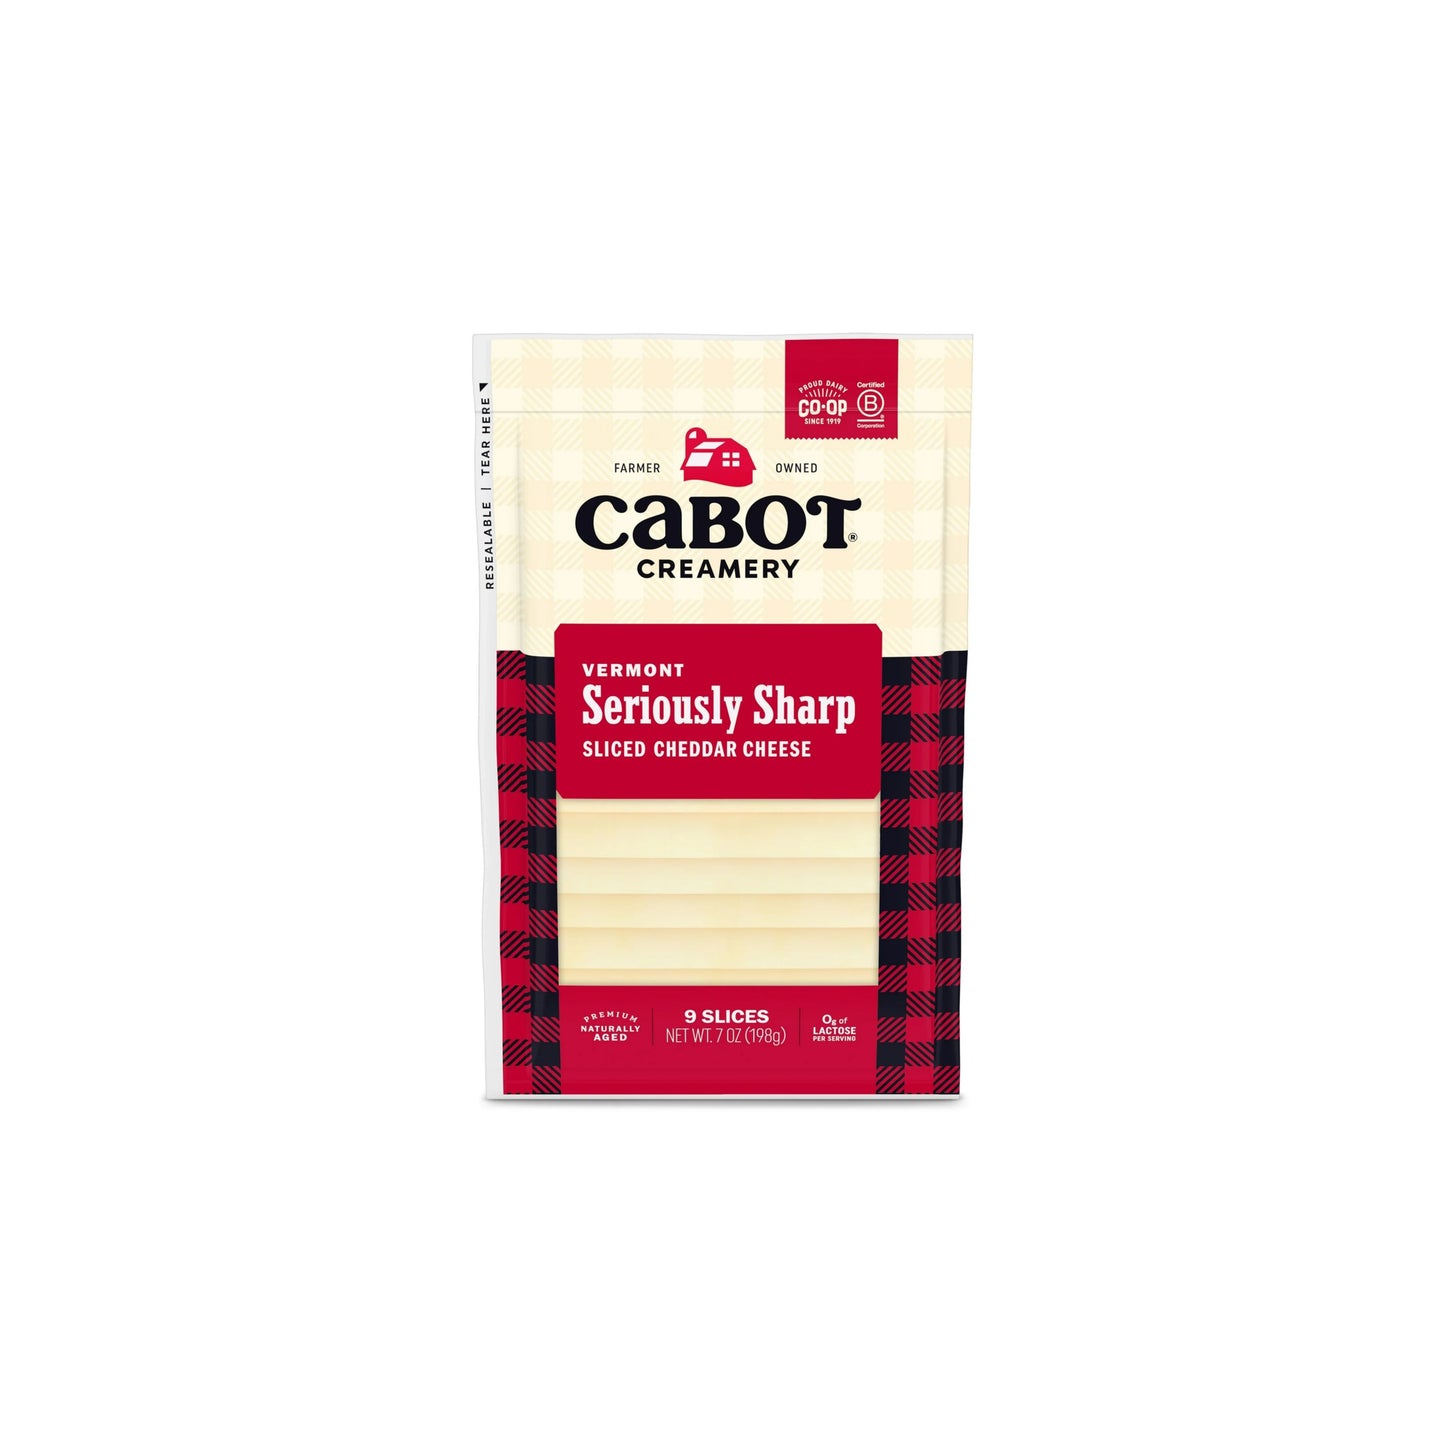 Cabot Seriously Sharp Cheddar Cheese Slices (9 Slices)